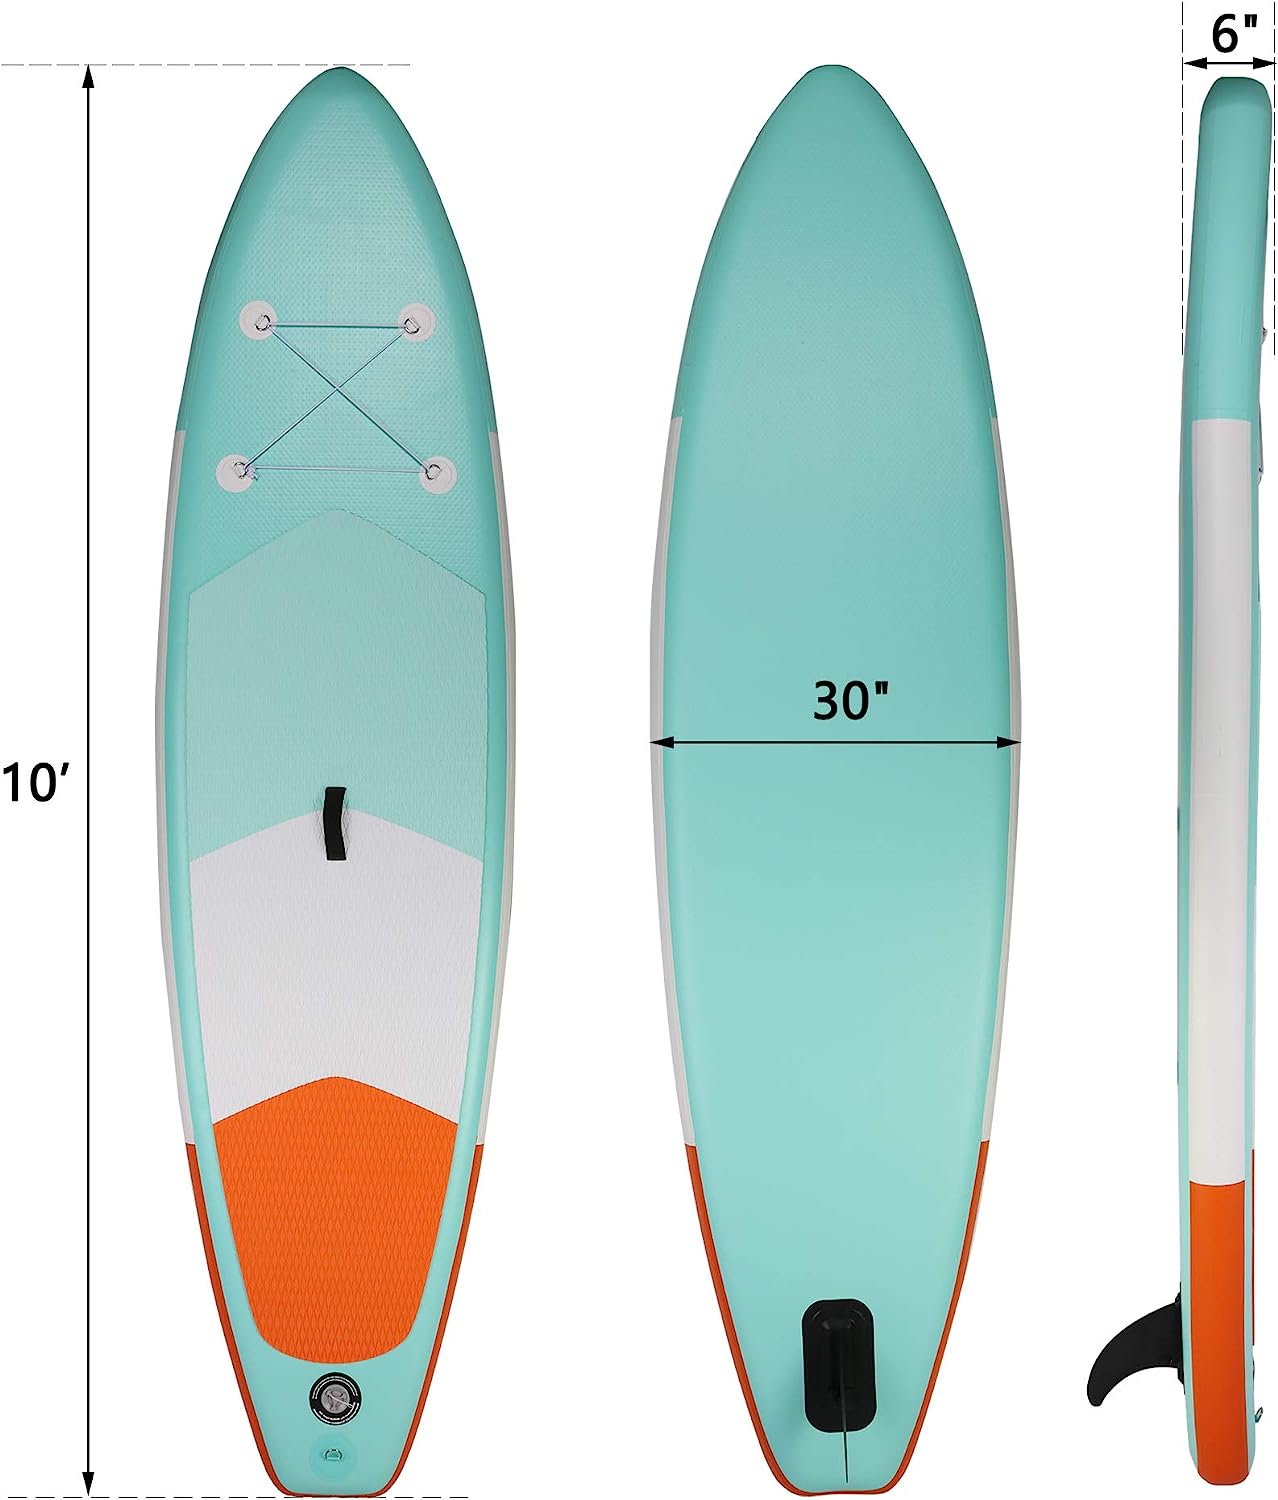 LUCKYERMORE 10'x30''x6'' Inflatable Stand Up Paddle Board with SUP Accessories & Backpack, Green